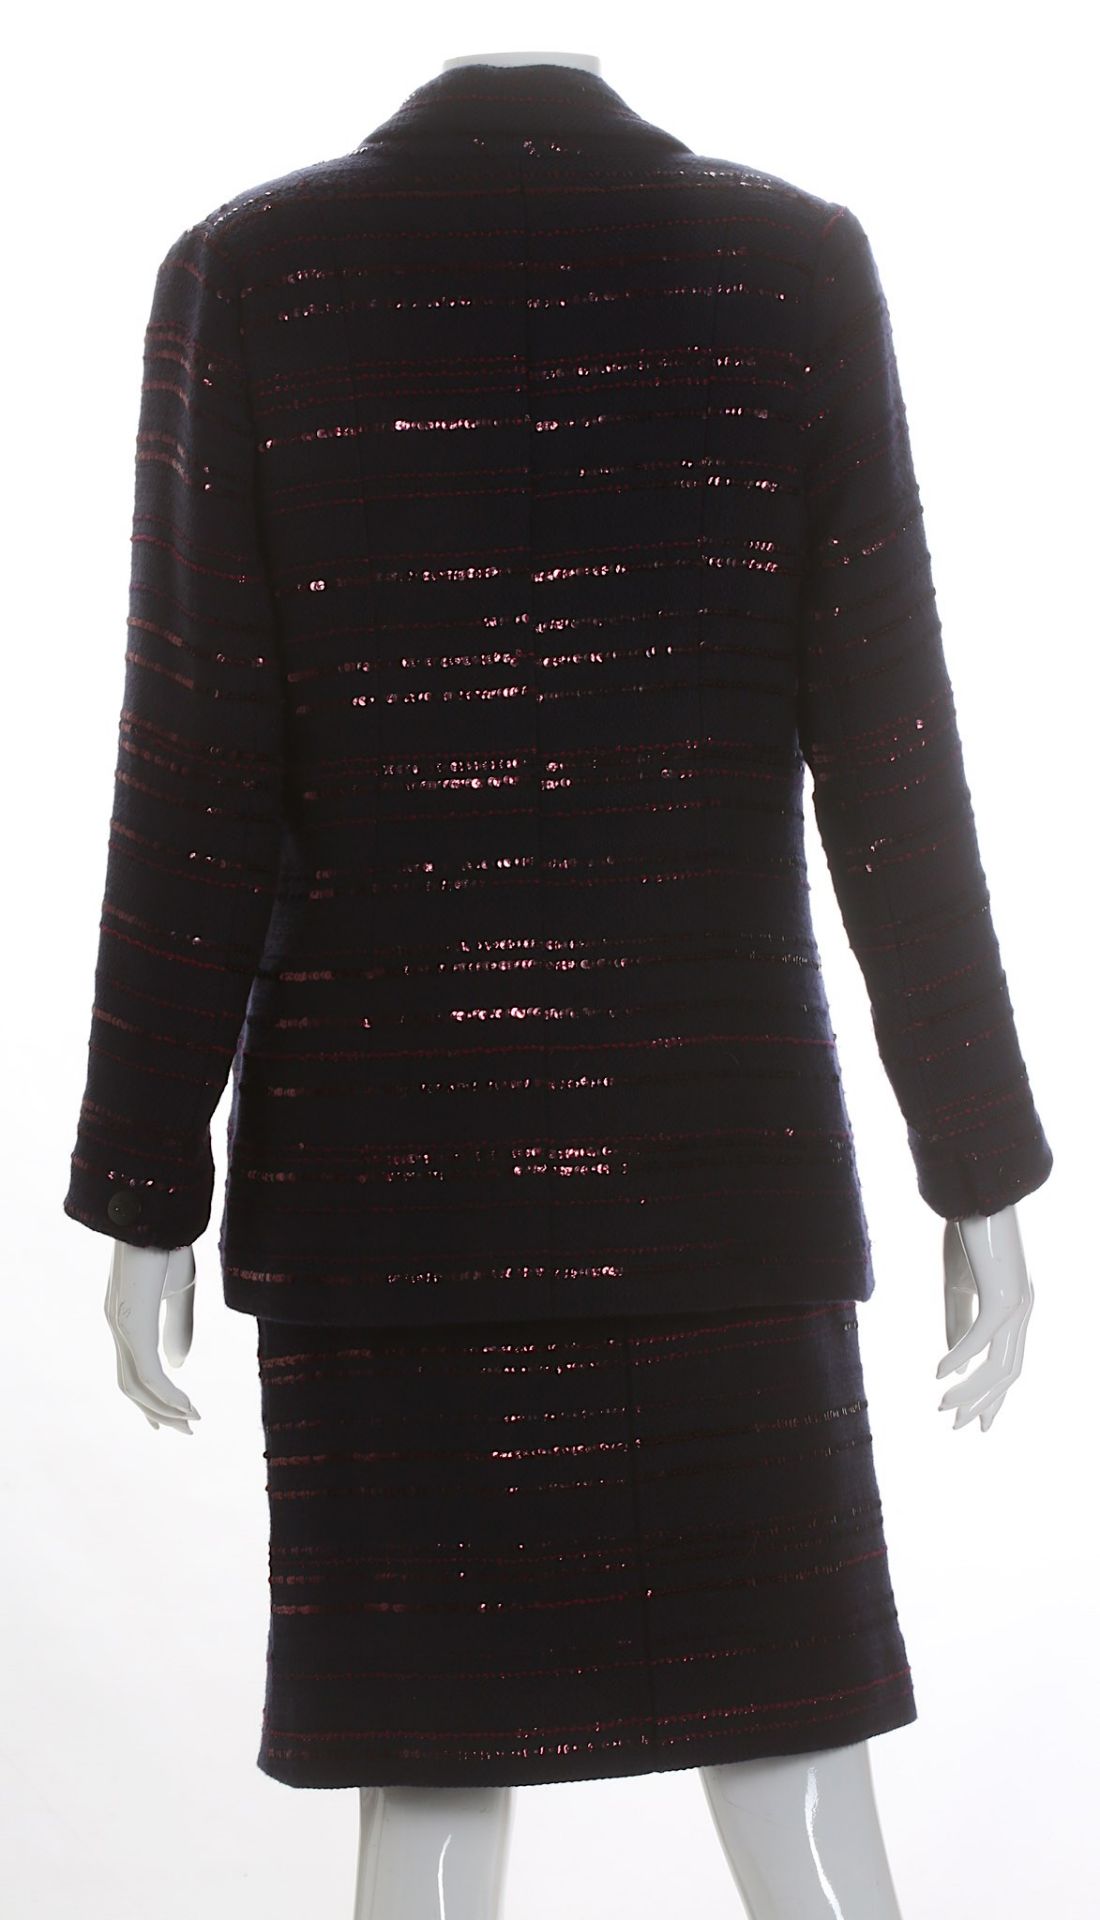 Chanel Navy Wool and Sequin Skirt Suit, c. 2000, n - Image 4 of 7